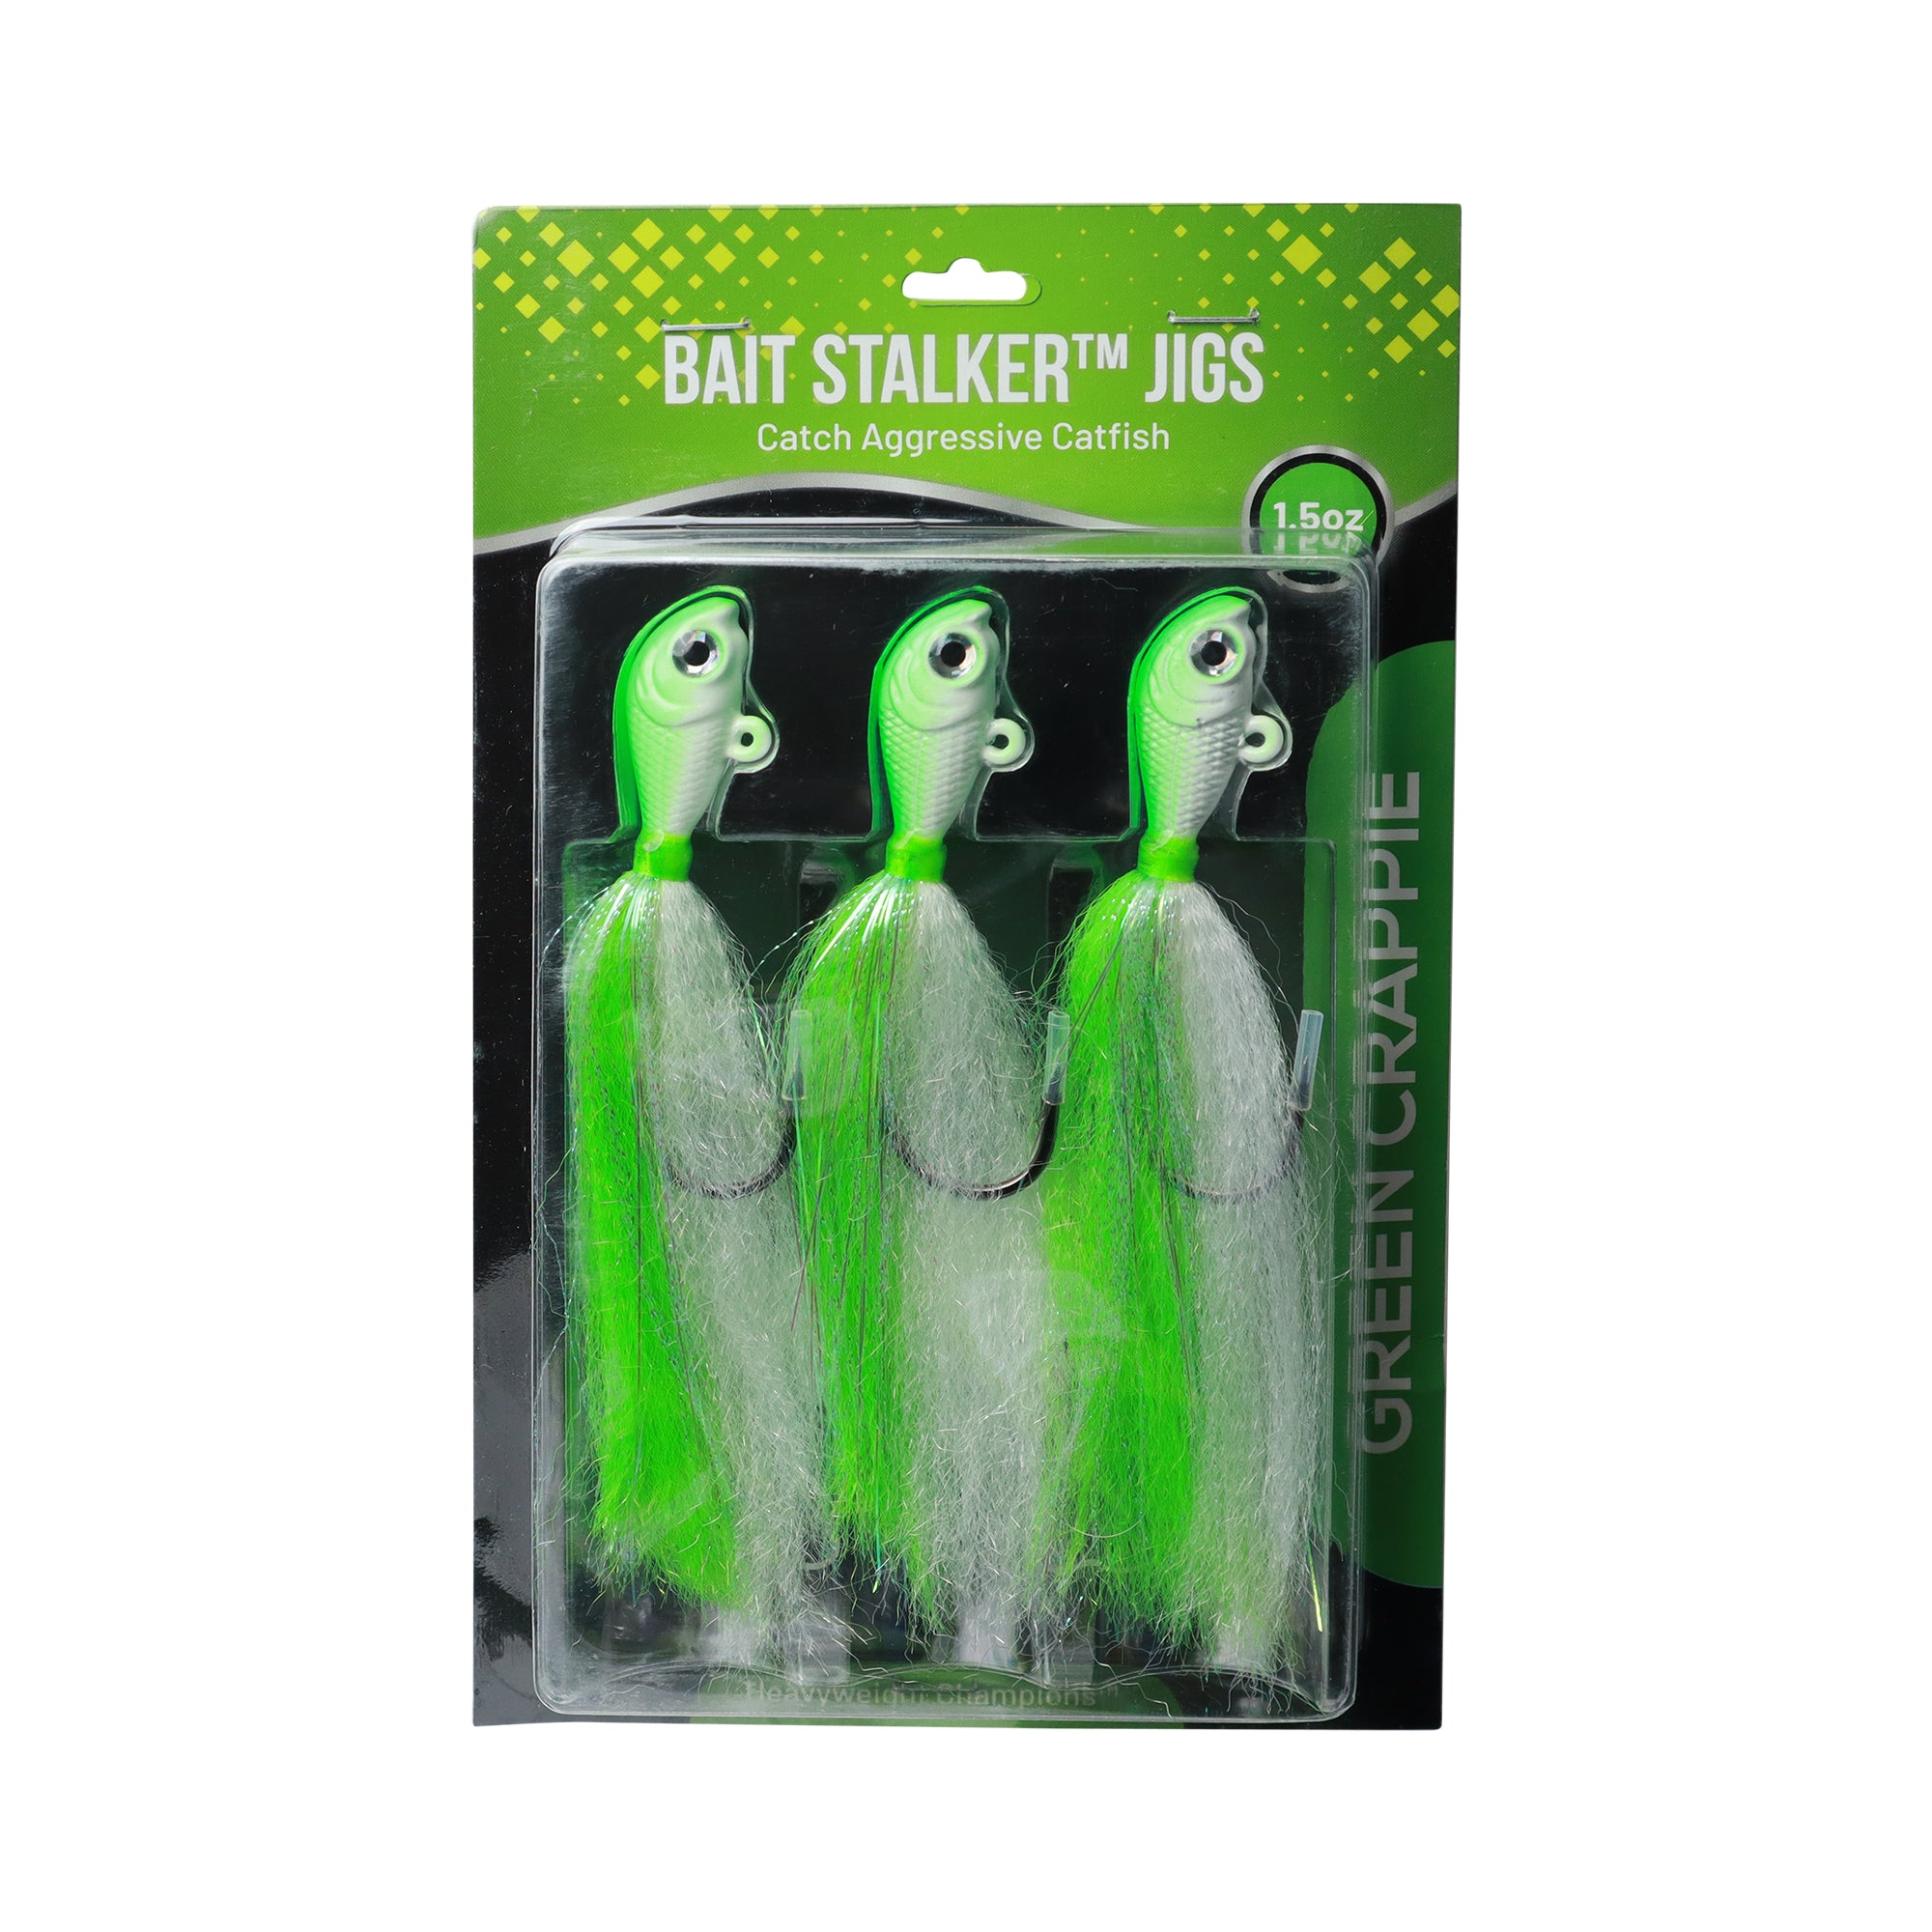 Bait Stalker Jigs: Artificial Lures for Catching Catfish, 3-Pack